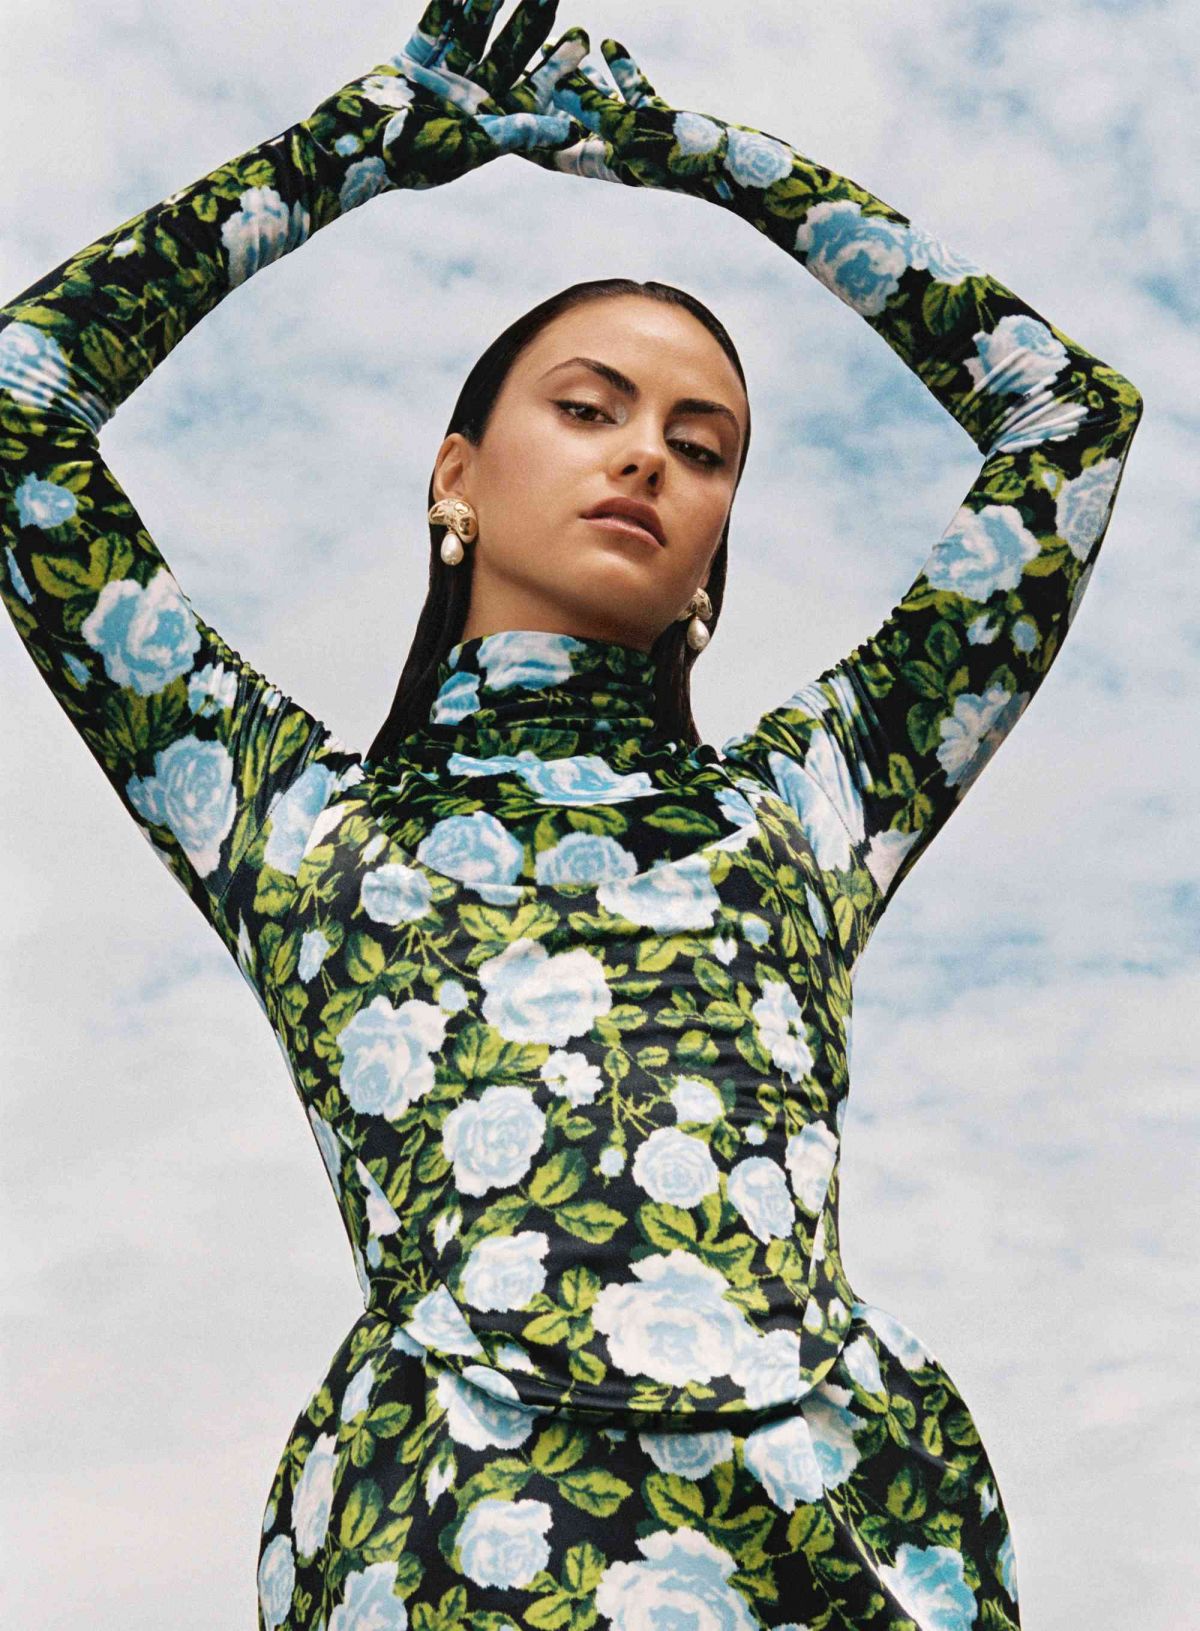 Camila Mendes Photoshoot for Instyle Magazine, Fall 2022